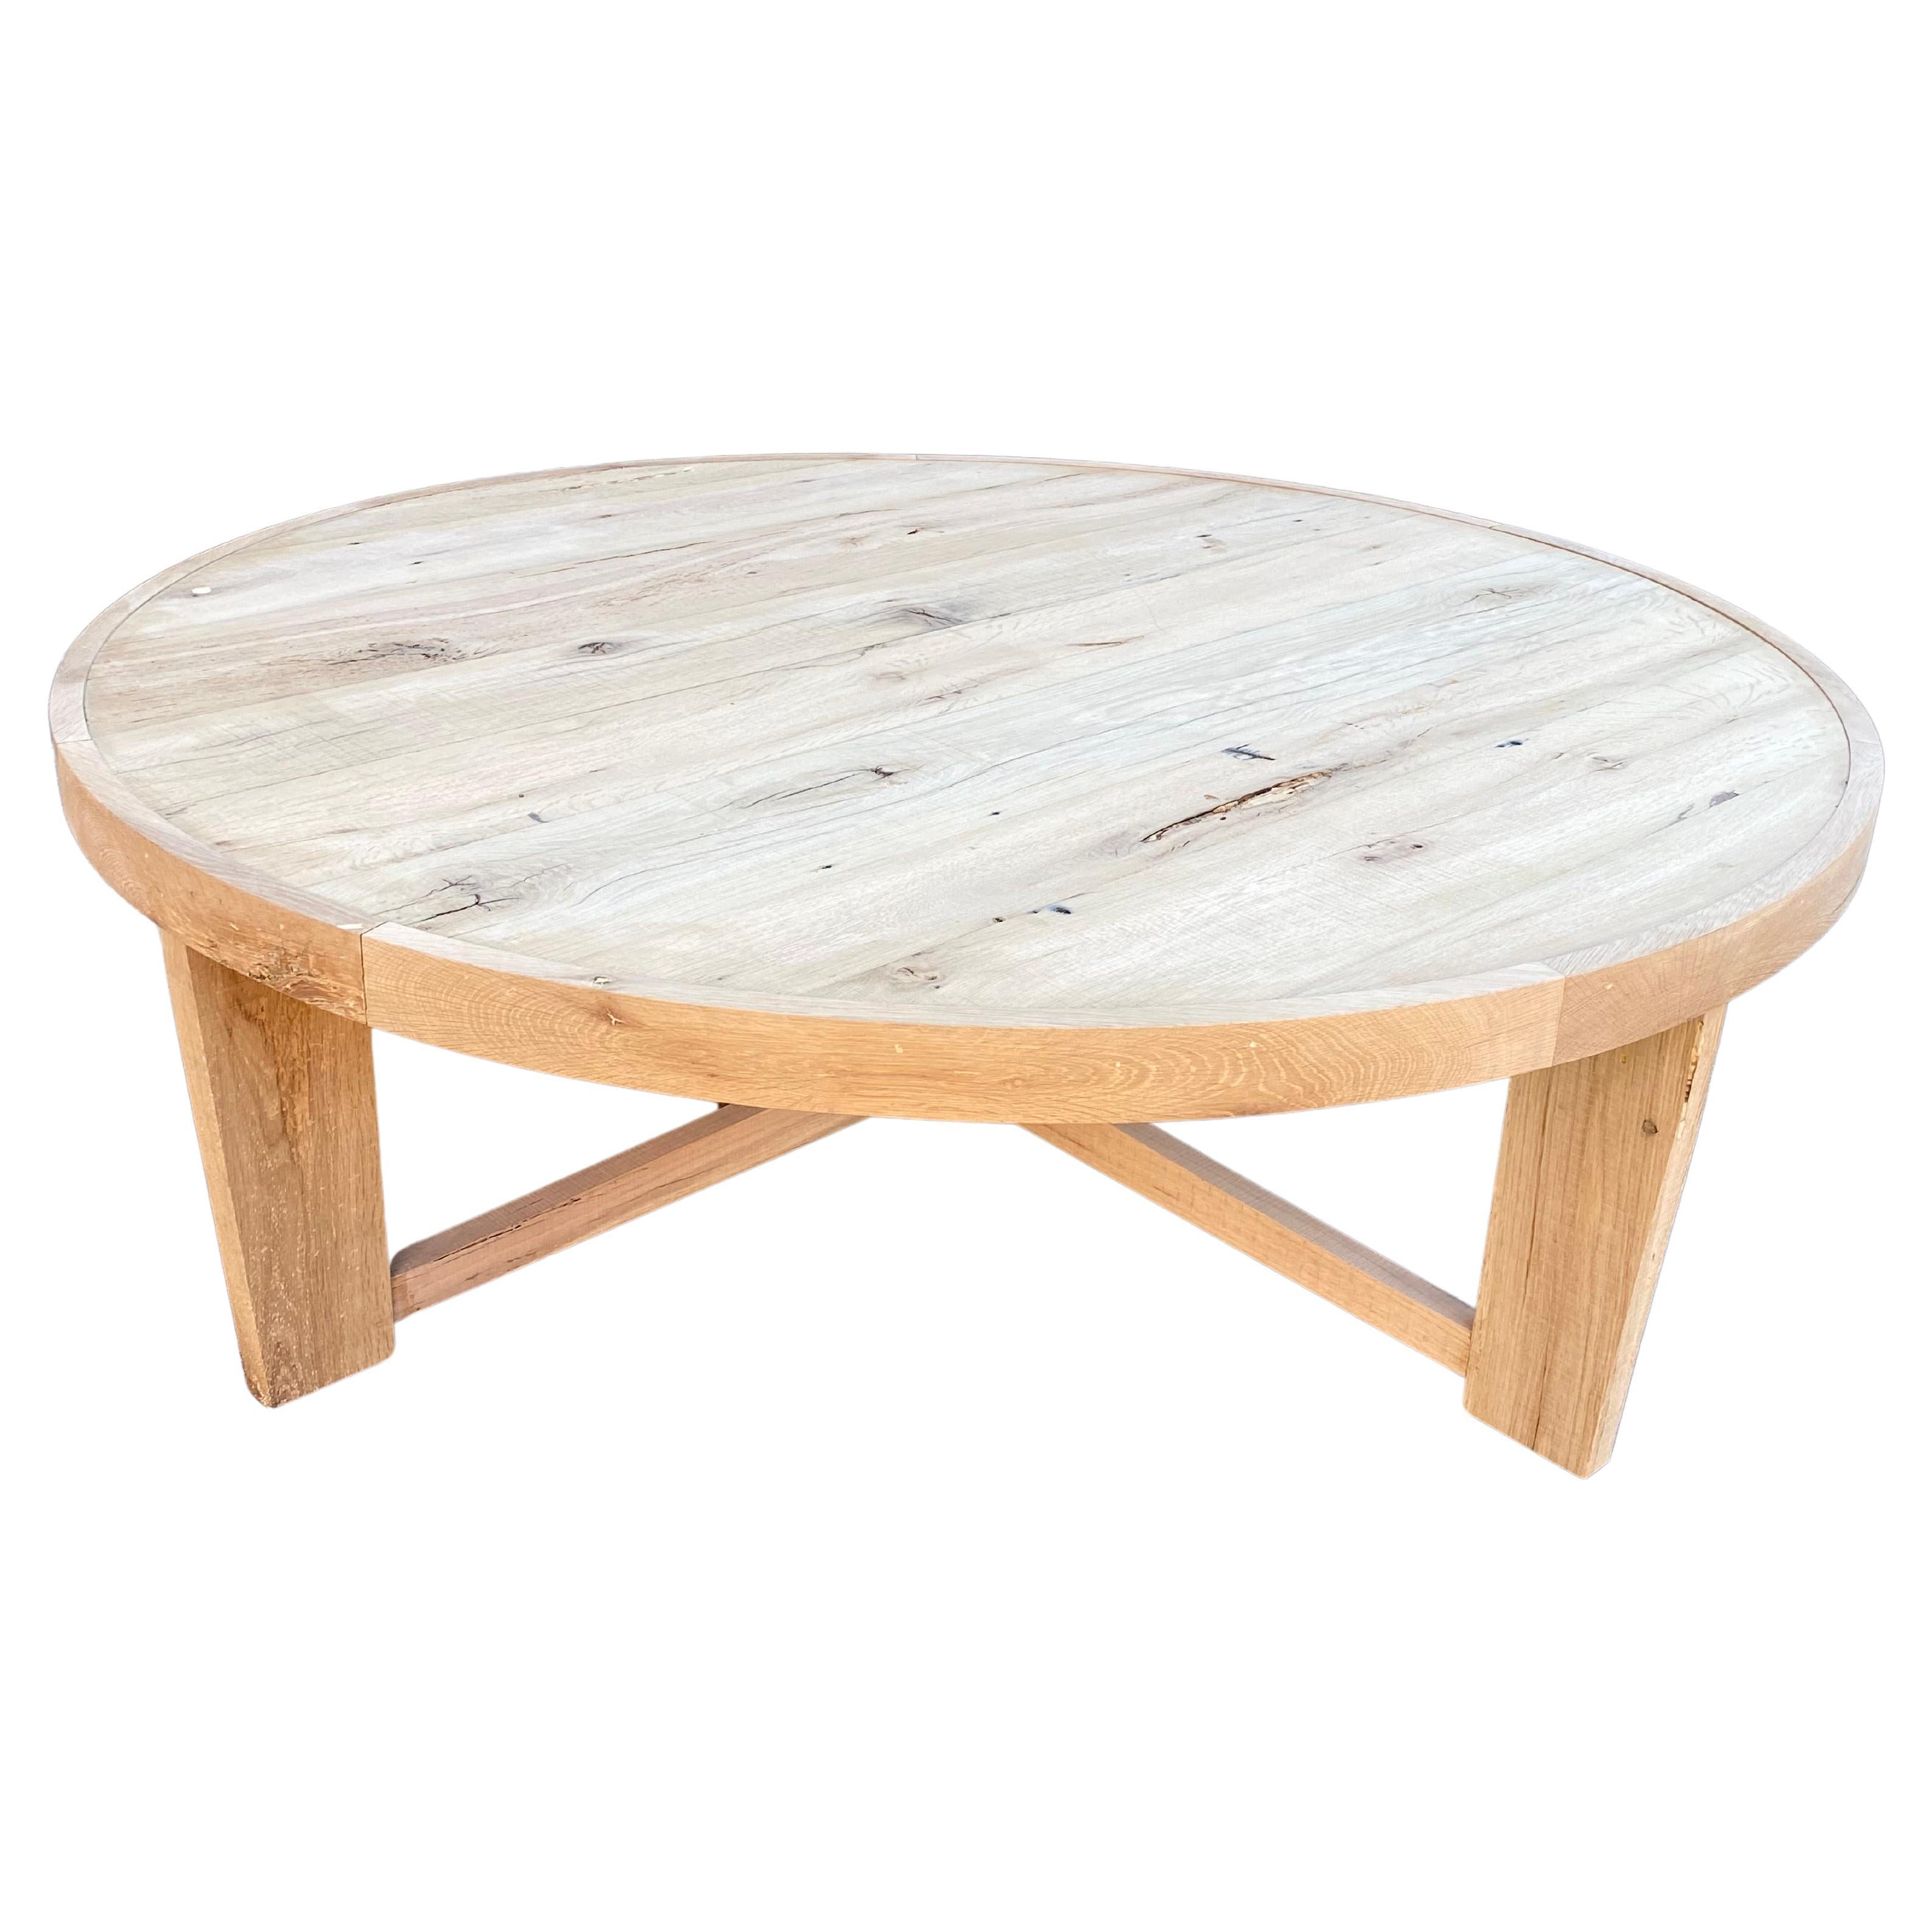 Modern Solid White Oak Handmade Coffee Table by Fortunata Design For Sale